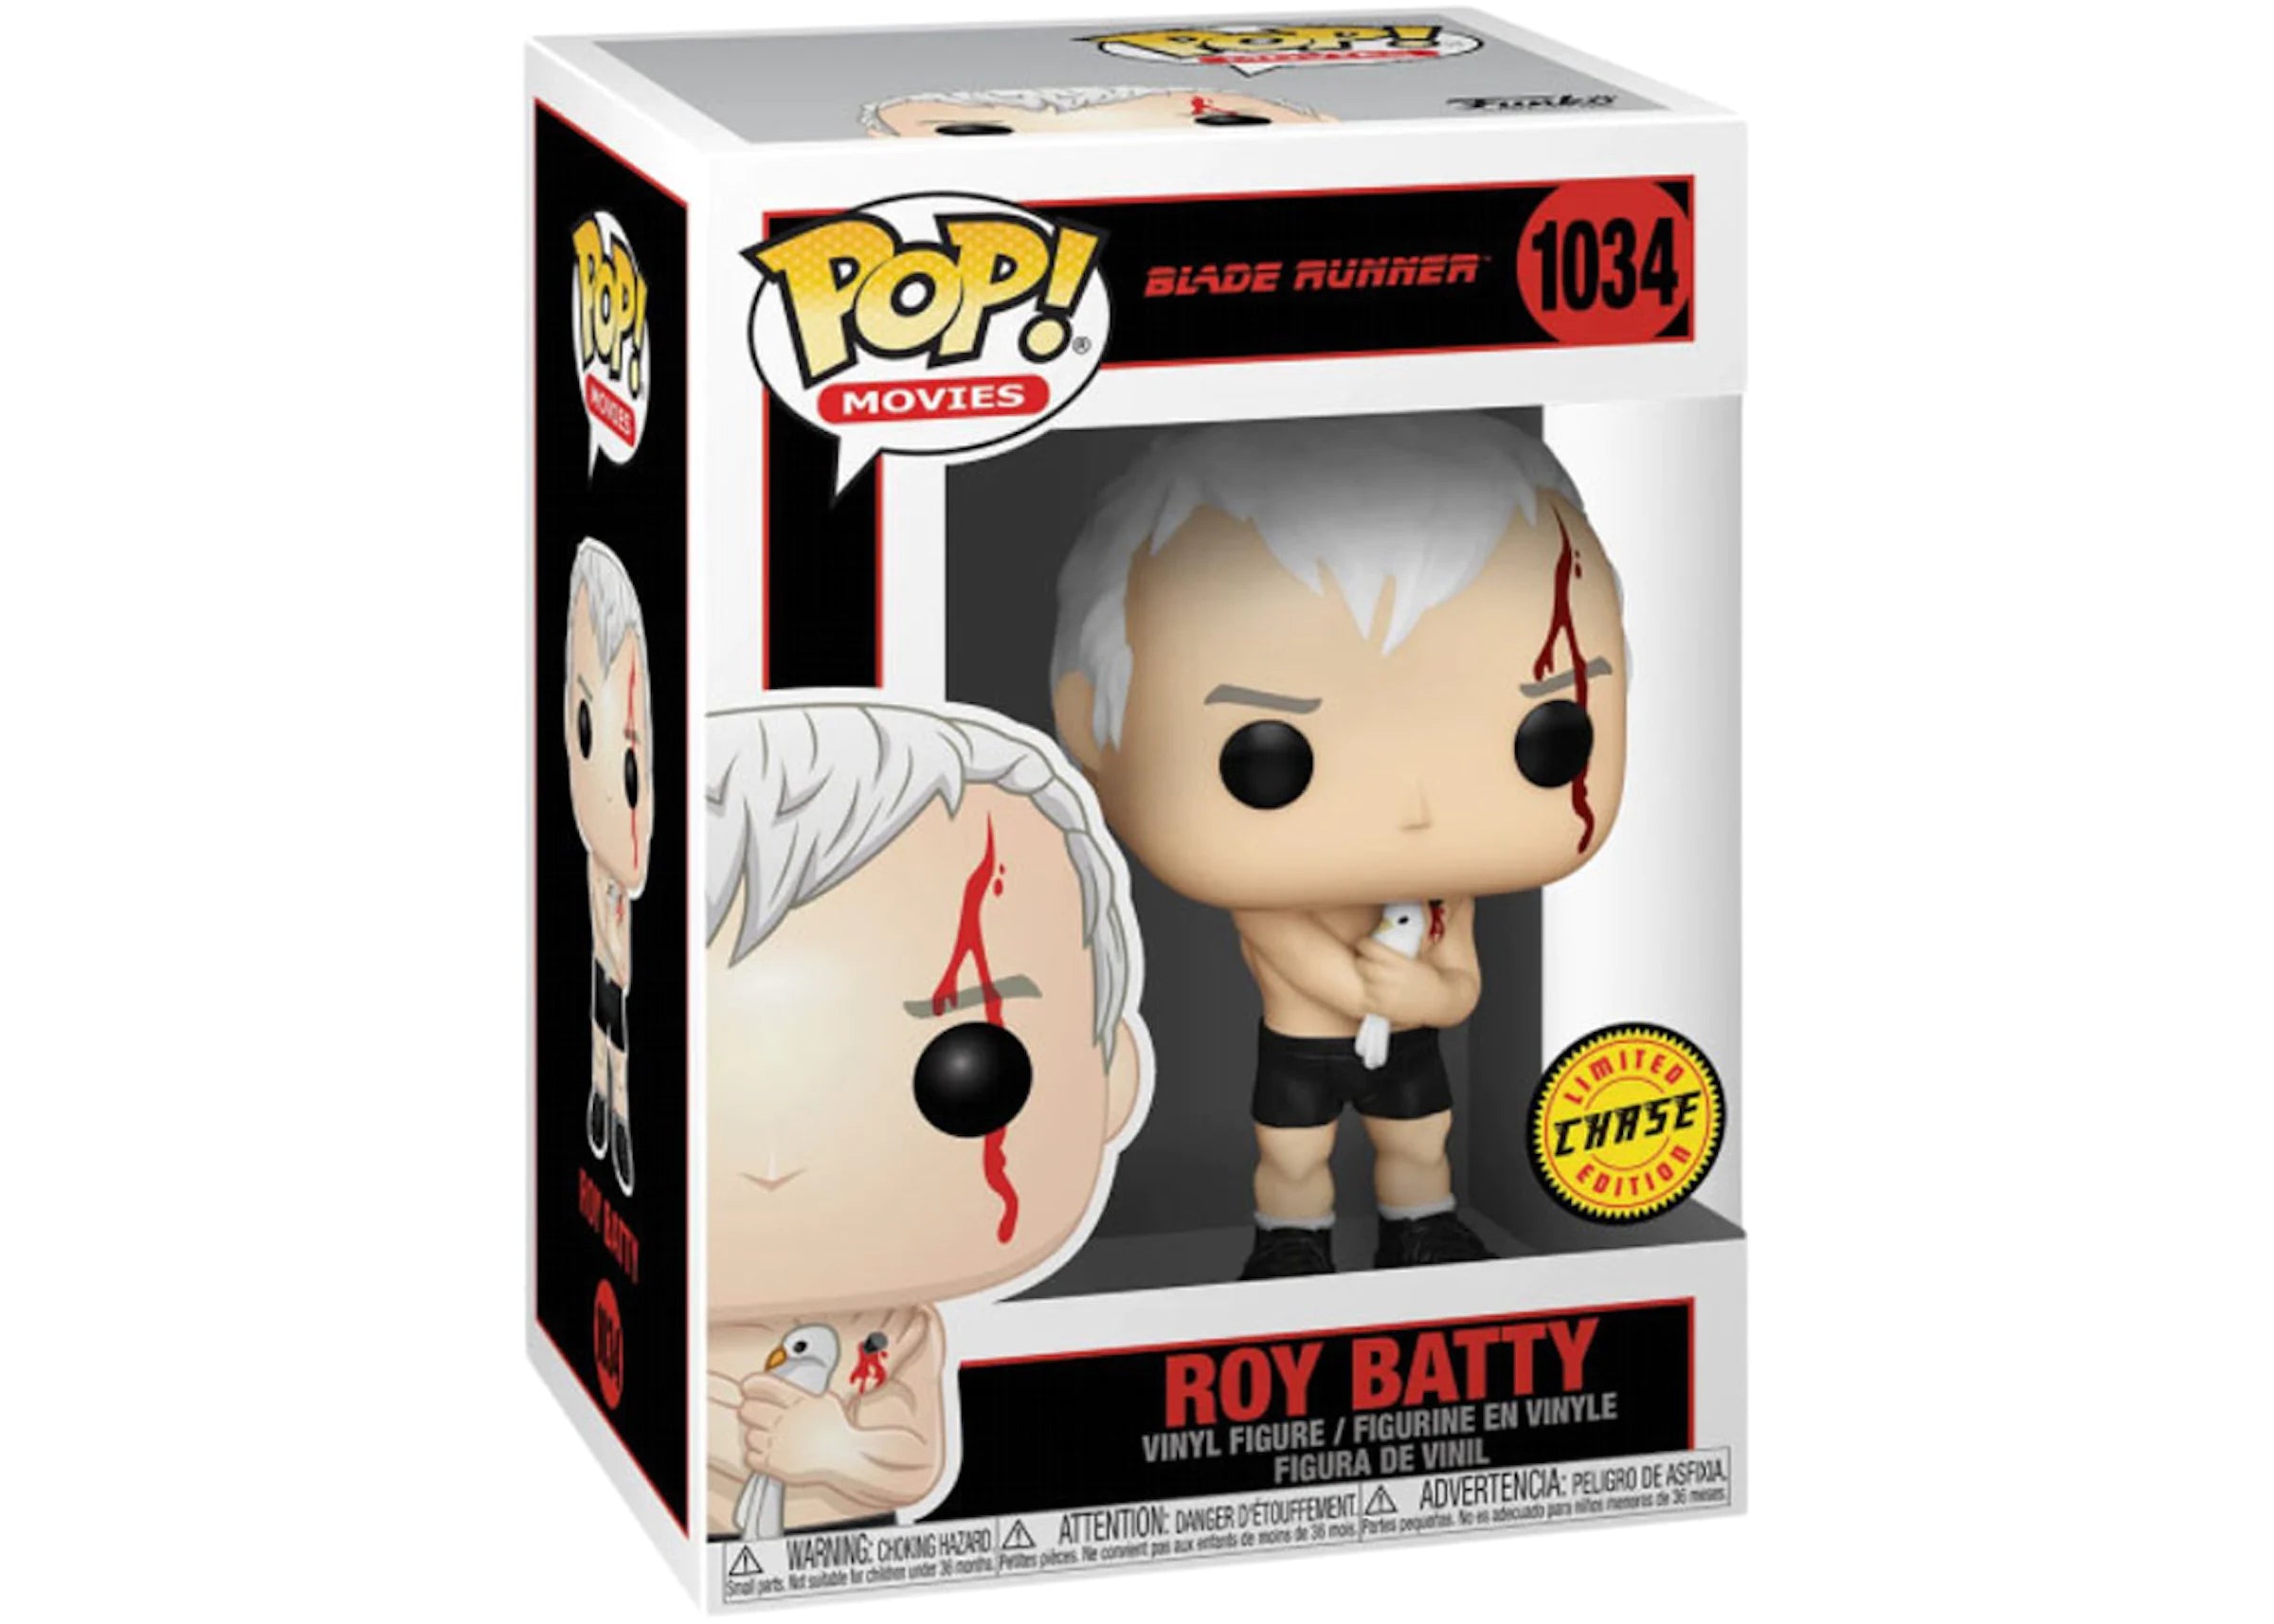 Pop! Movies - Blade Runner - Roy Batty - #1034 - LIMITED CHASE Edition